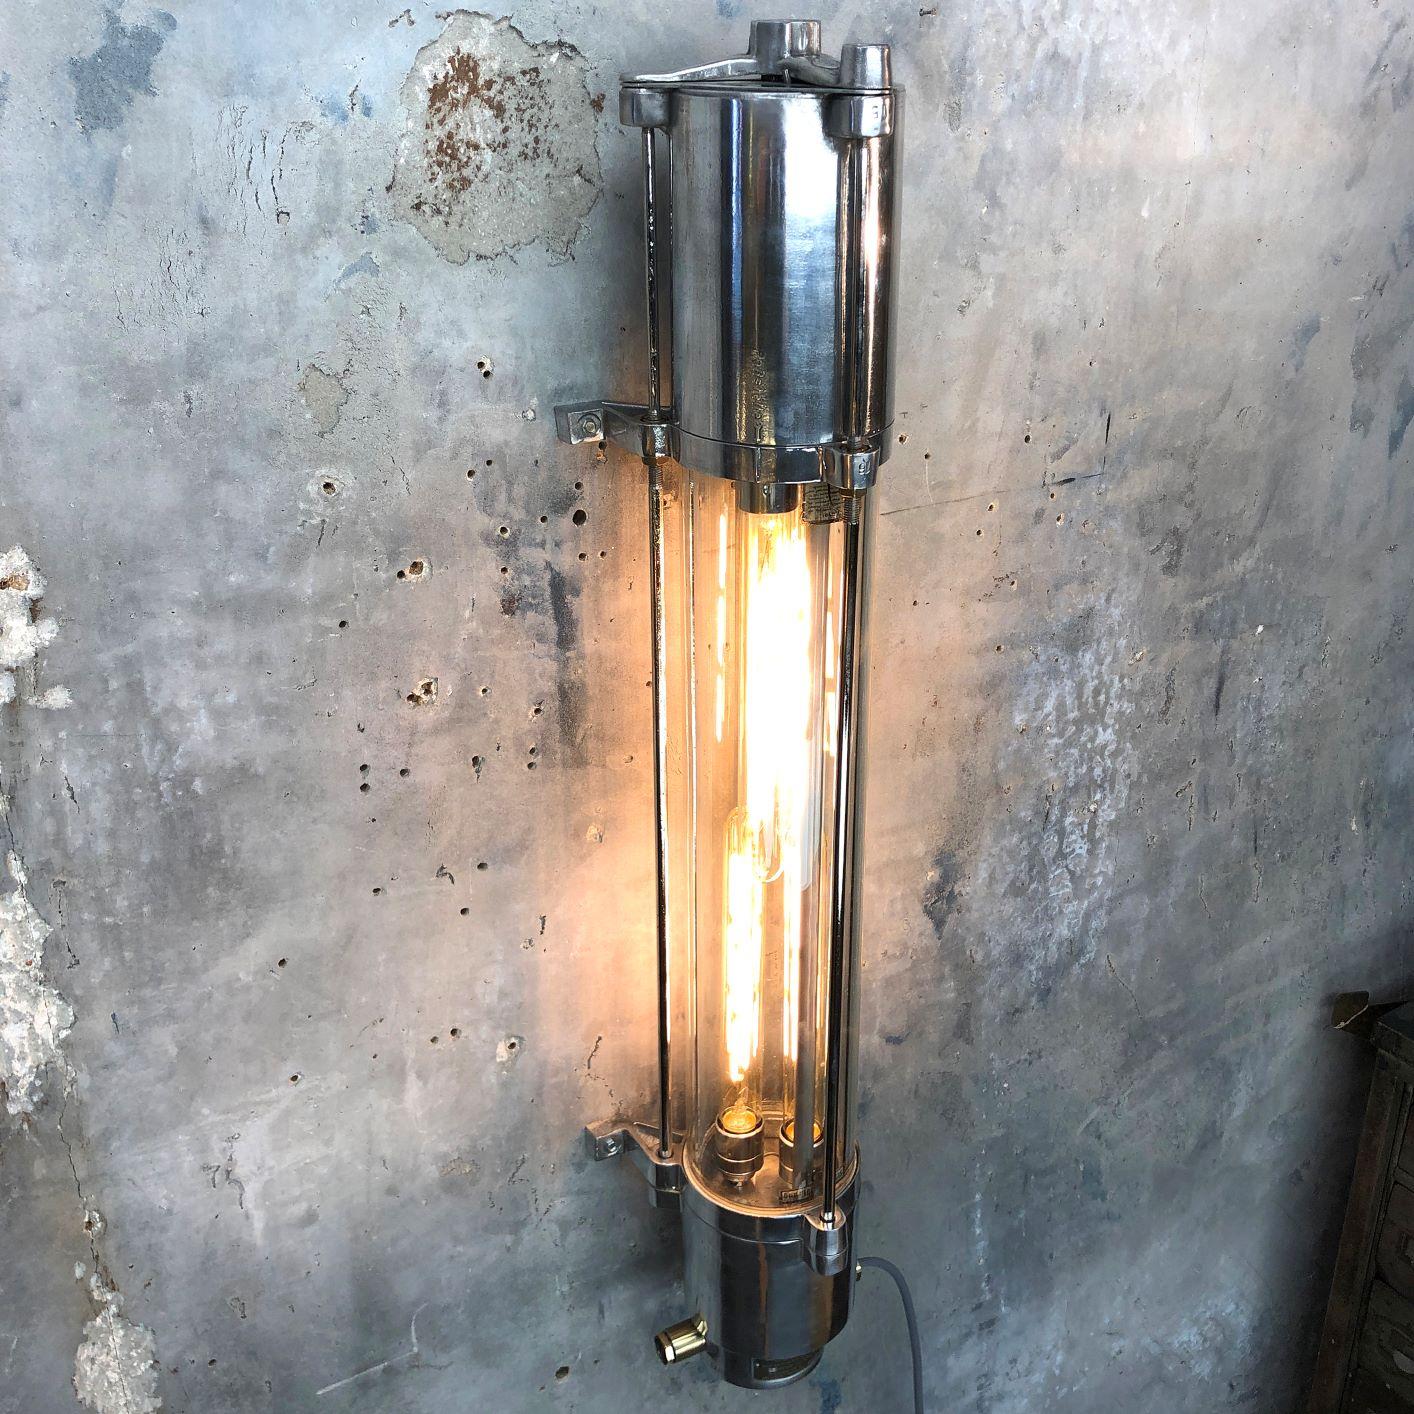 Late 20th Century 1970s German Wall Mounted Aluminium and Glass Explosion Proof Edison Tube Light